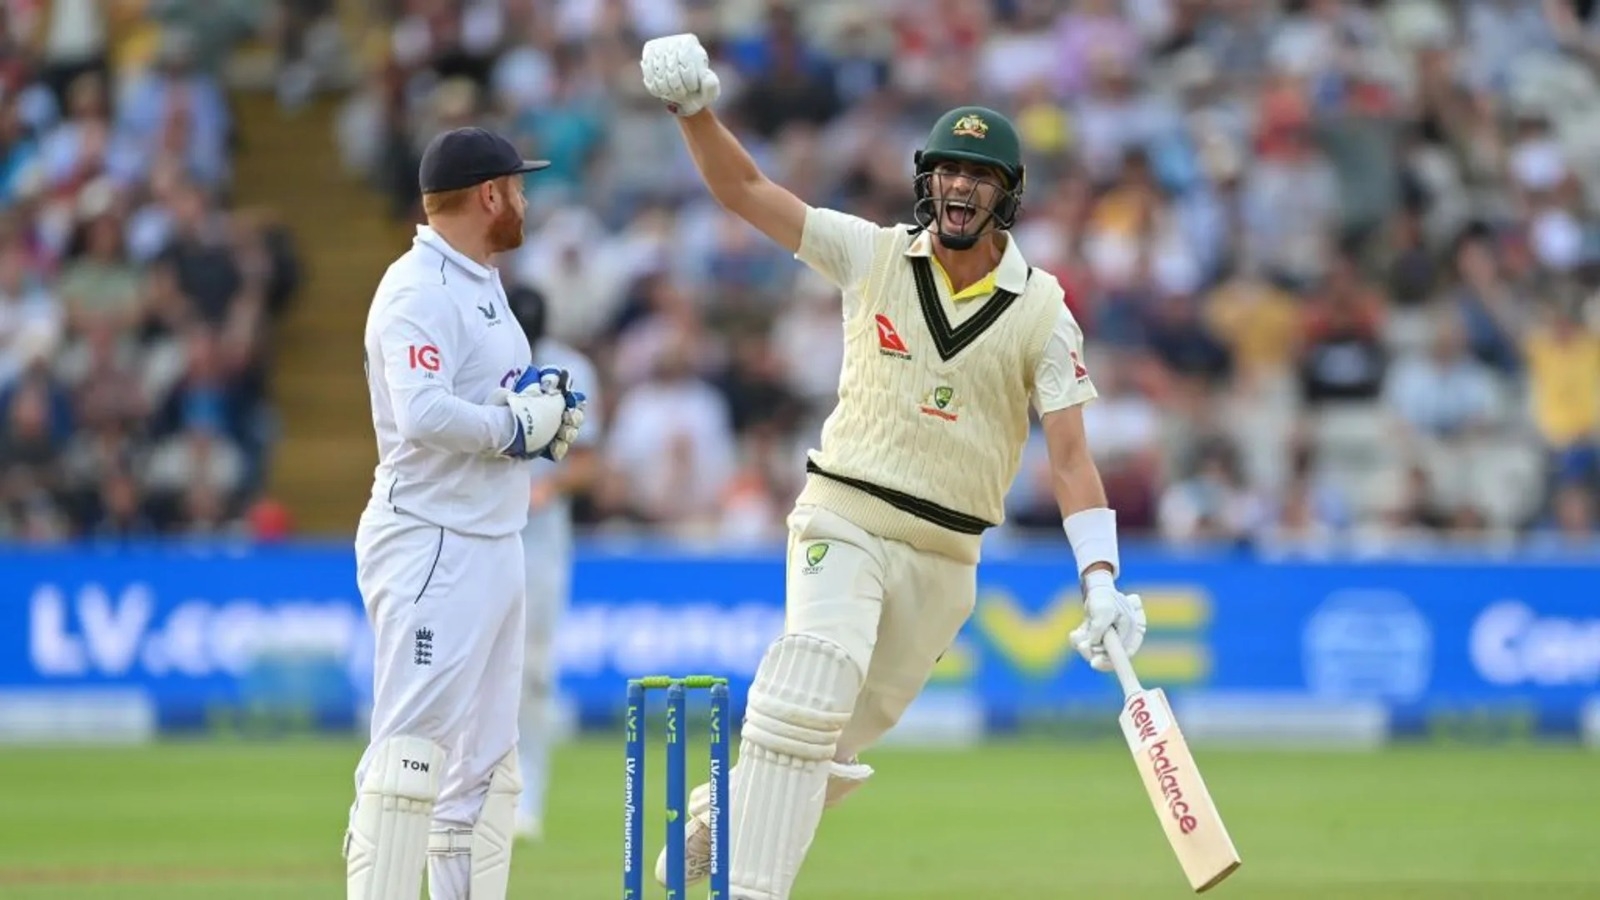 England's Filer, Gibson receive maiden call-up for Ashes